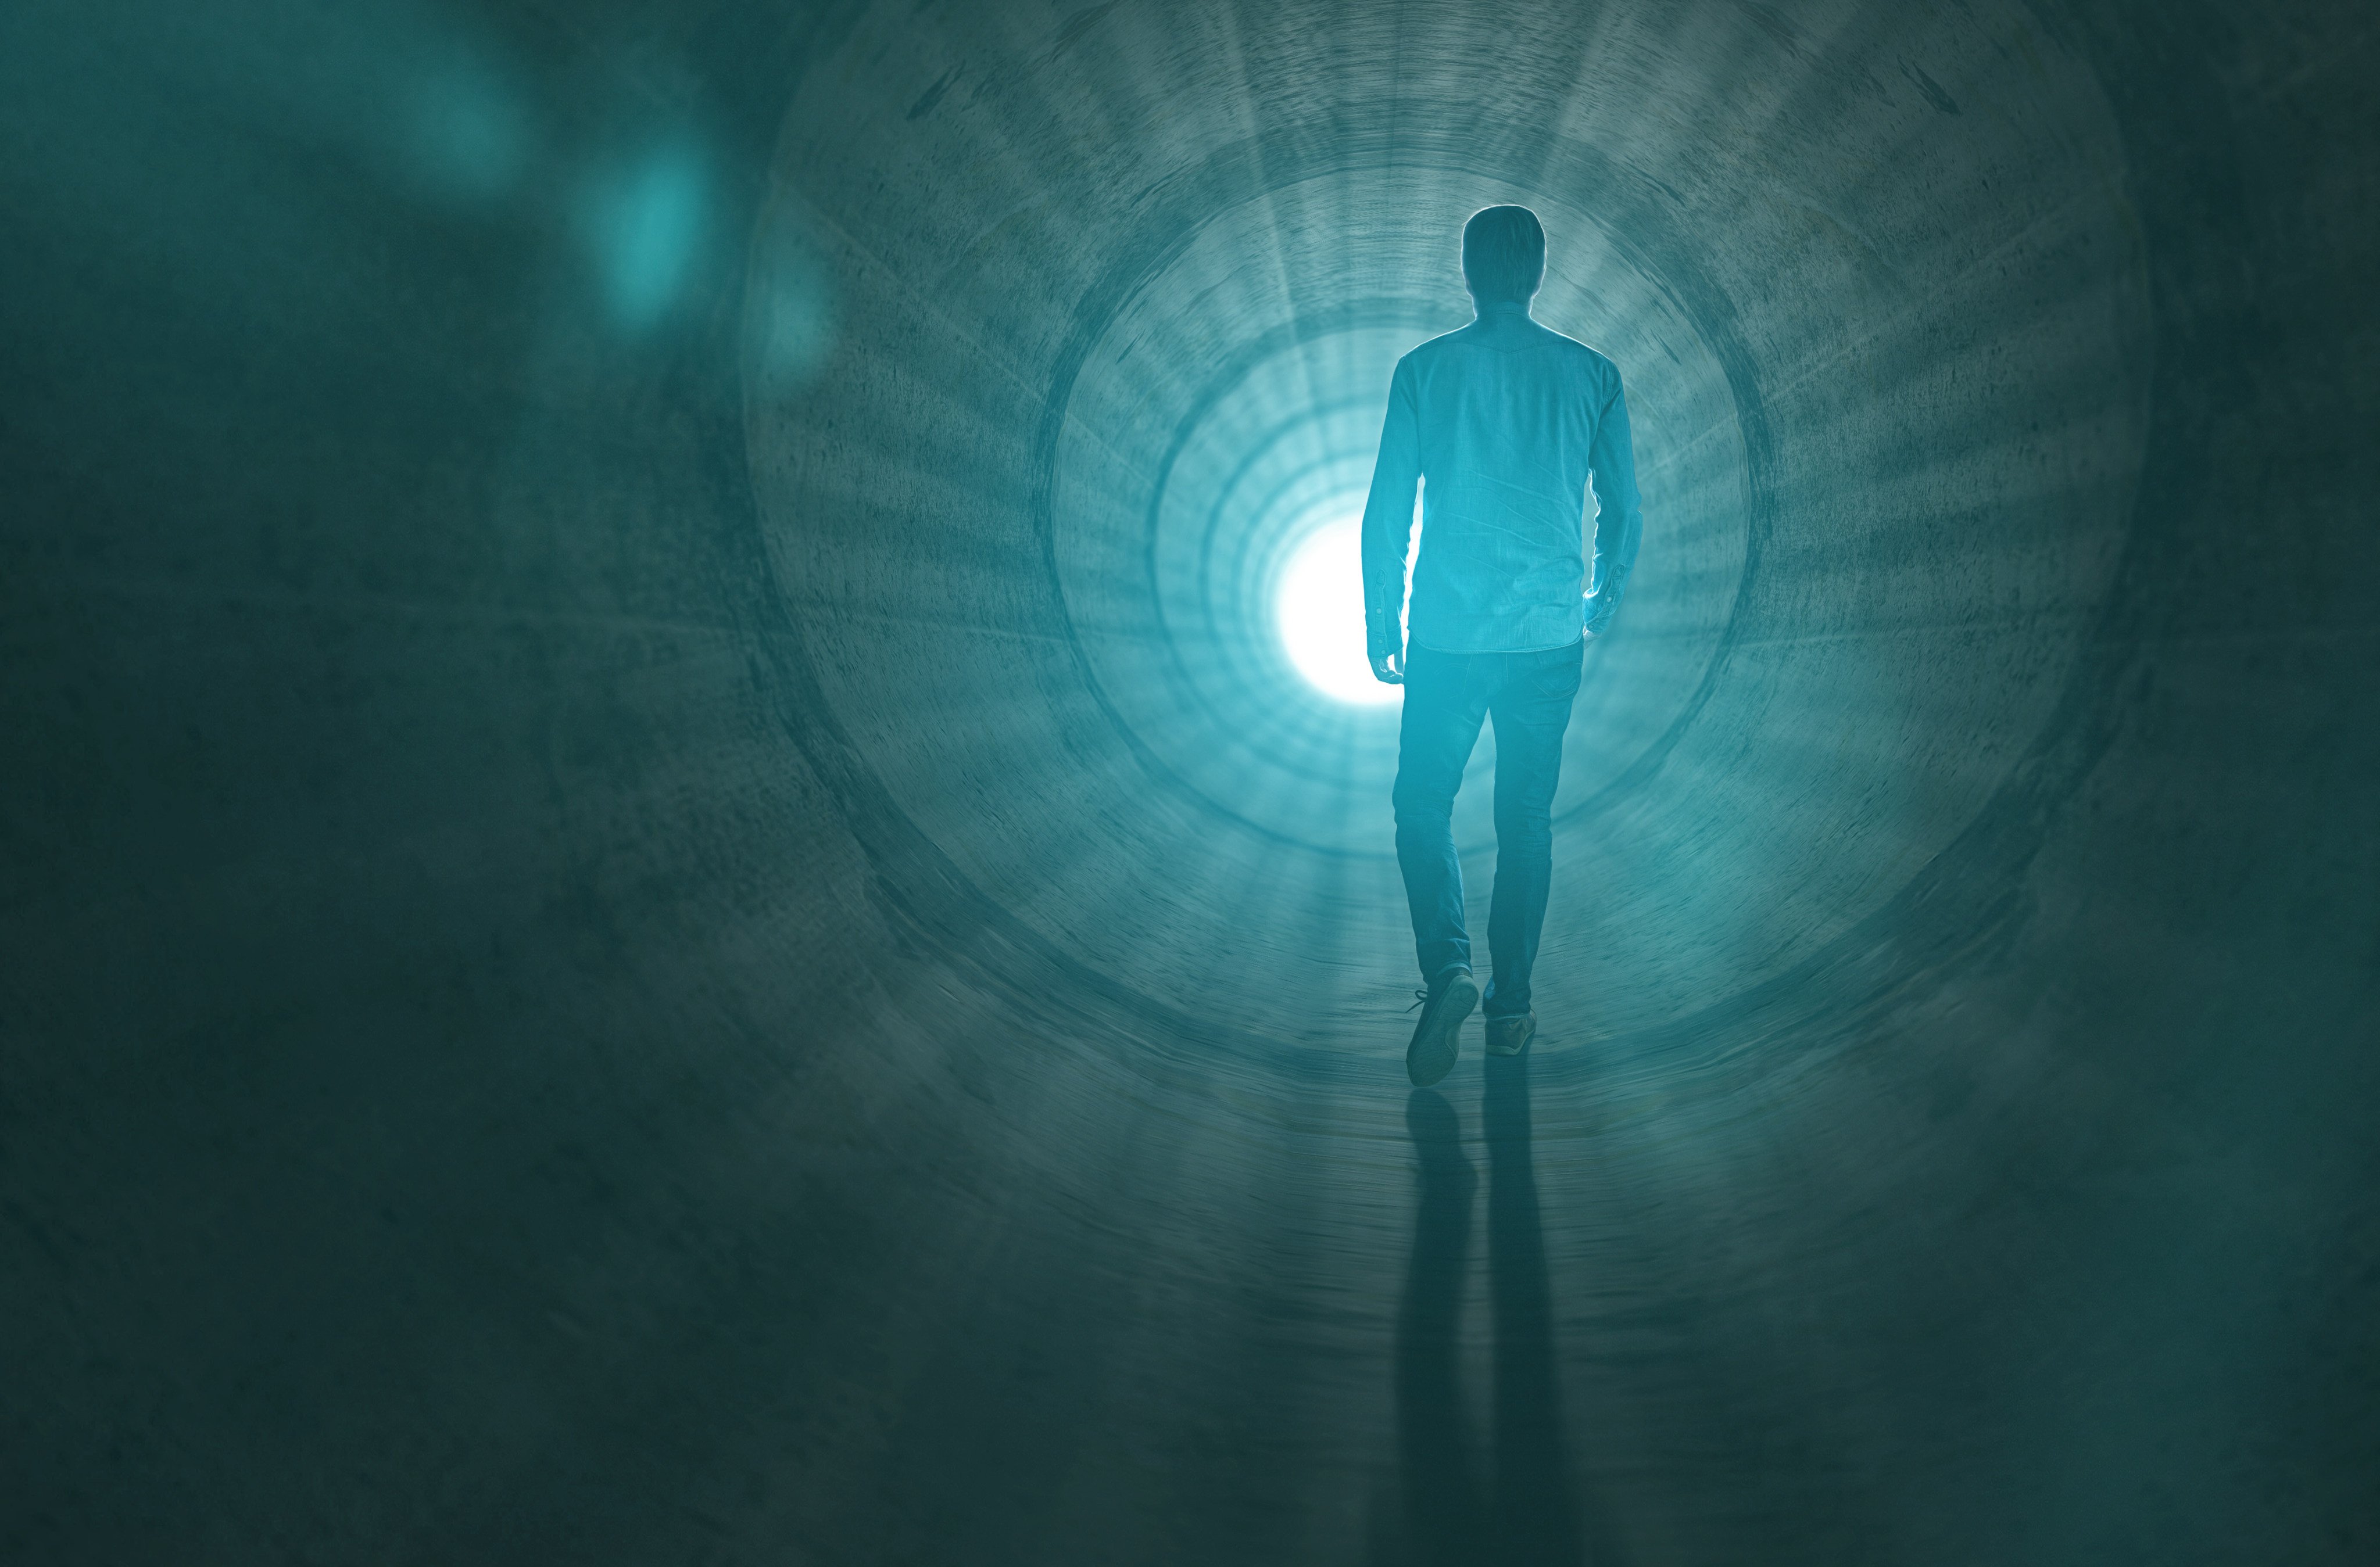 Many people who have had a near-death experience recall travelling through a tunnel toward a bright light. One doctor who studies people’s accounts of them says they may suggest the existence of a life after death. Photo: Shutterstock